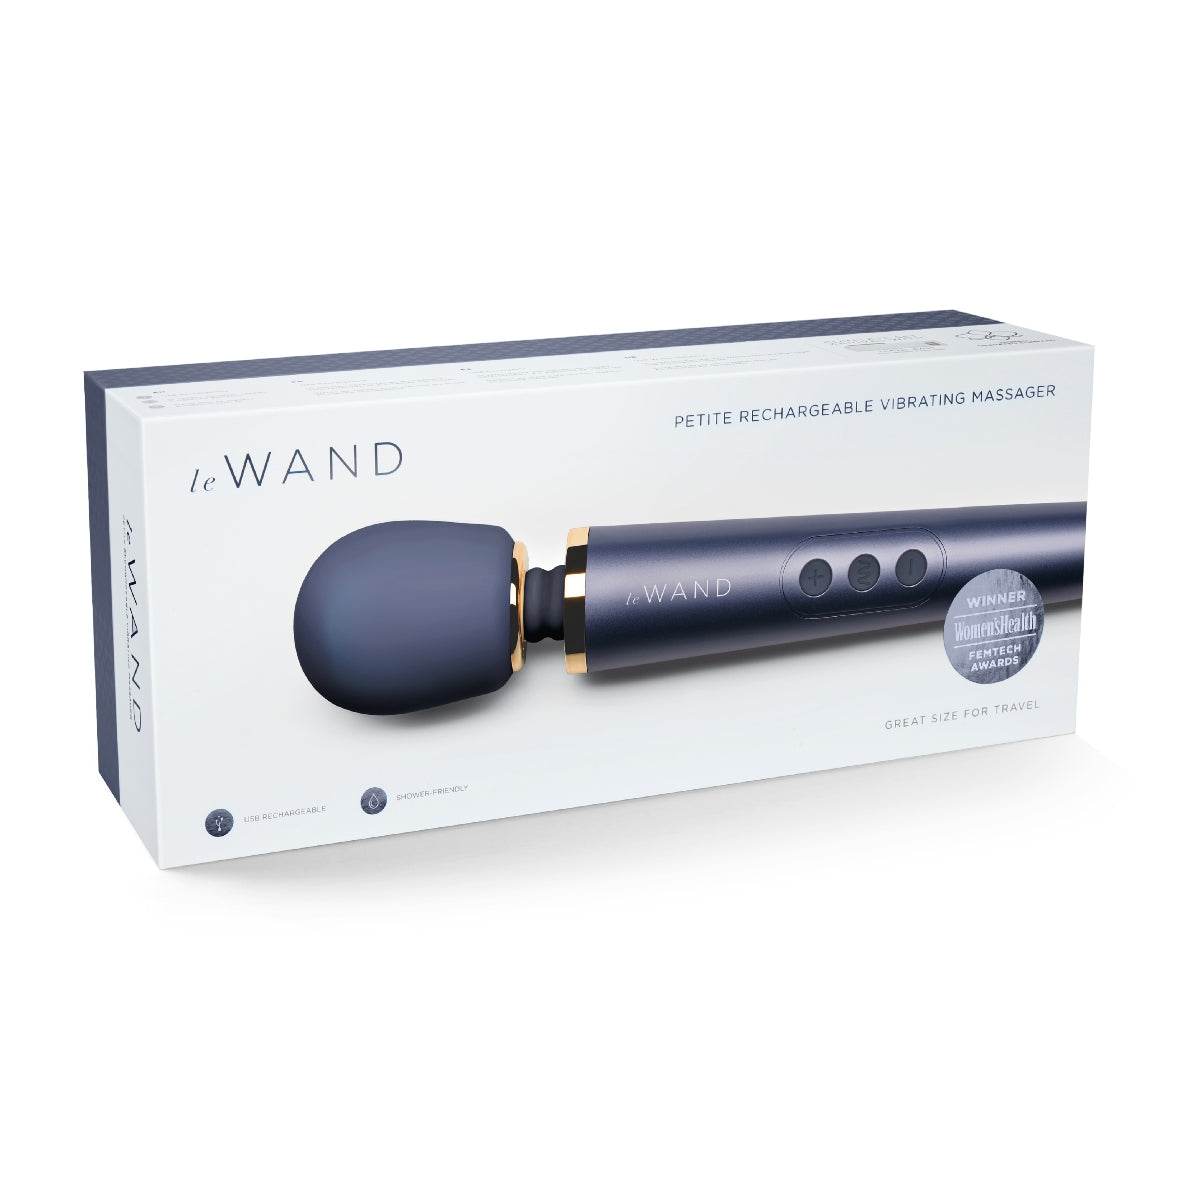 Le Wand | Petite Rechargeable Vibrating Massager - Navy